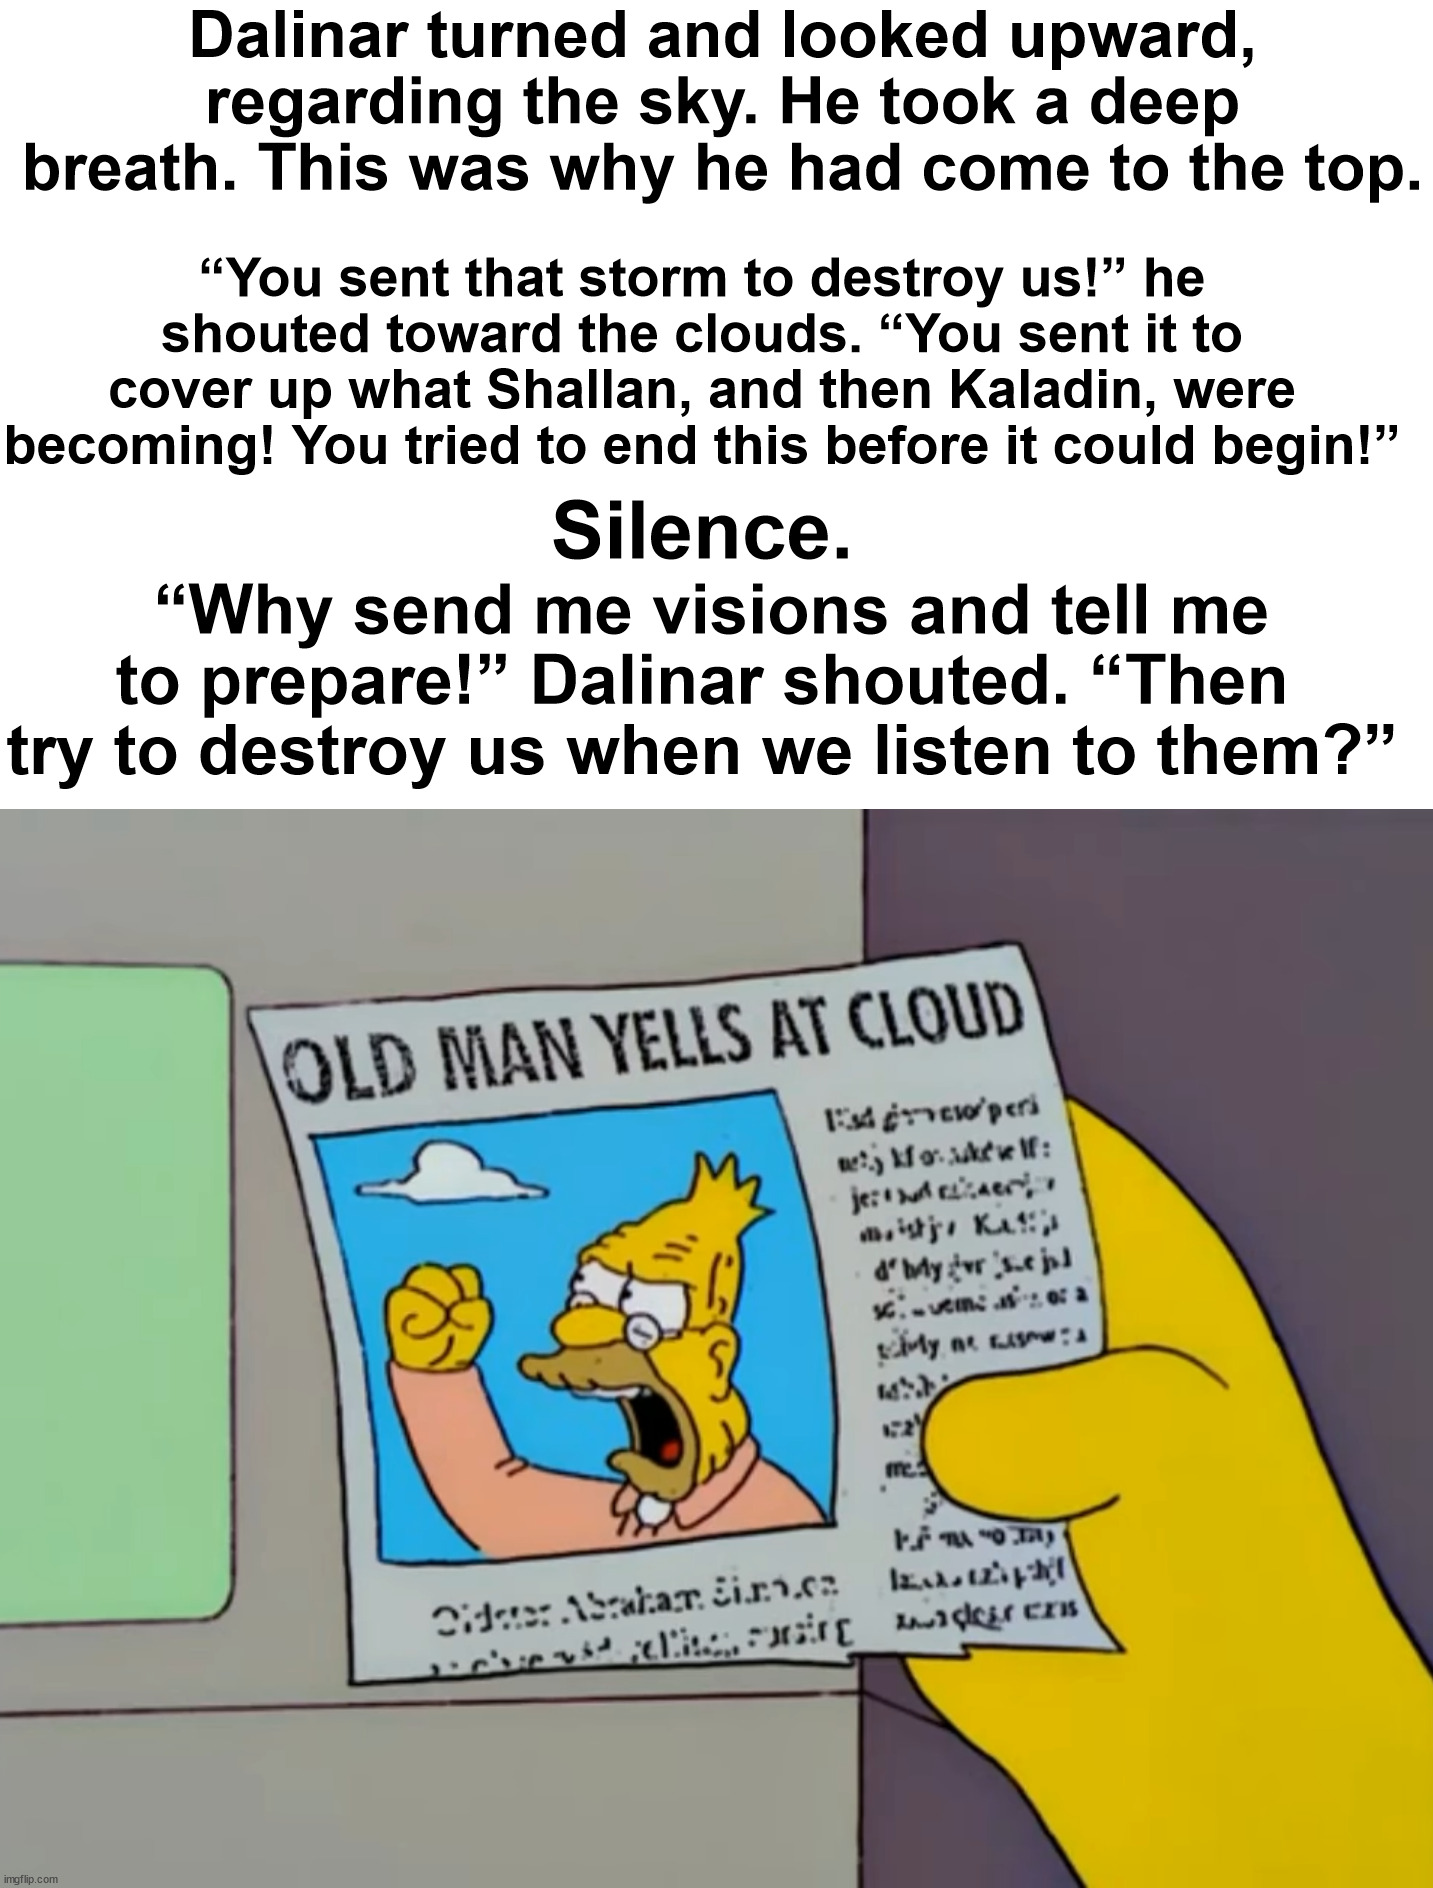 Dalinar yells at cloud | Dalinar turned and looked upward, regarding the sky. He took a deep breath. This was why he had come to the top. “You sent that storm to destroy us!” he shouted toward the clouds. “You sent it to cover up what Shallan, and then Kaladin, were becoming! You tried to end this before it could begin!”; Silence. “Why send me visions and tell me to prepare!” Dalinar shouted. “Then try to destroy us when we listen to them?” | image tagged in old man yells at cloud,dalinar kholin,the stormlight archive,stormlight archive,words of radiance | made w/ Imgflip meme maker